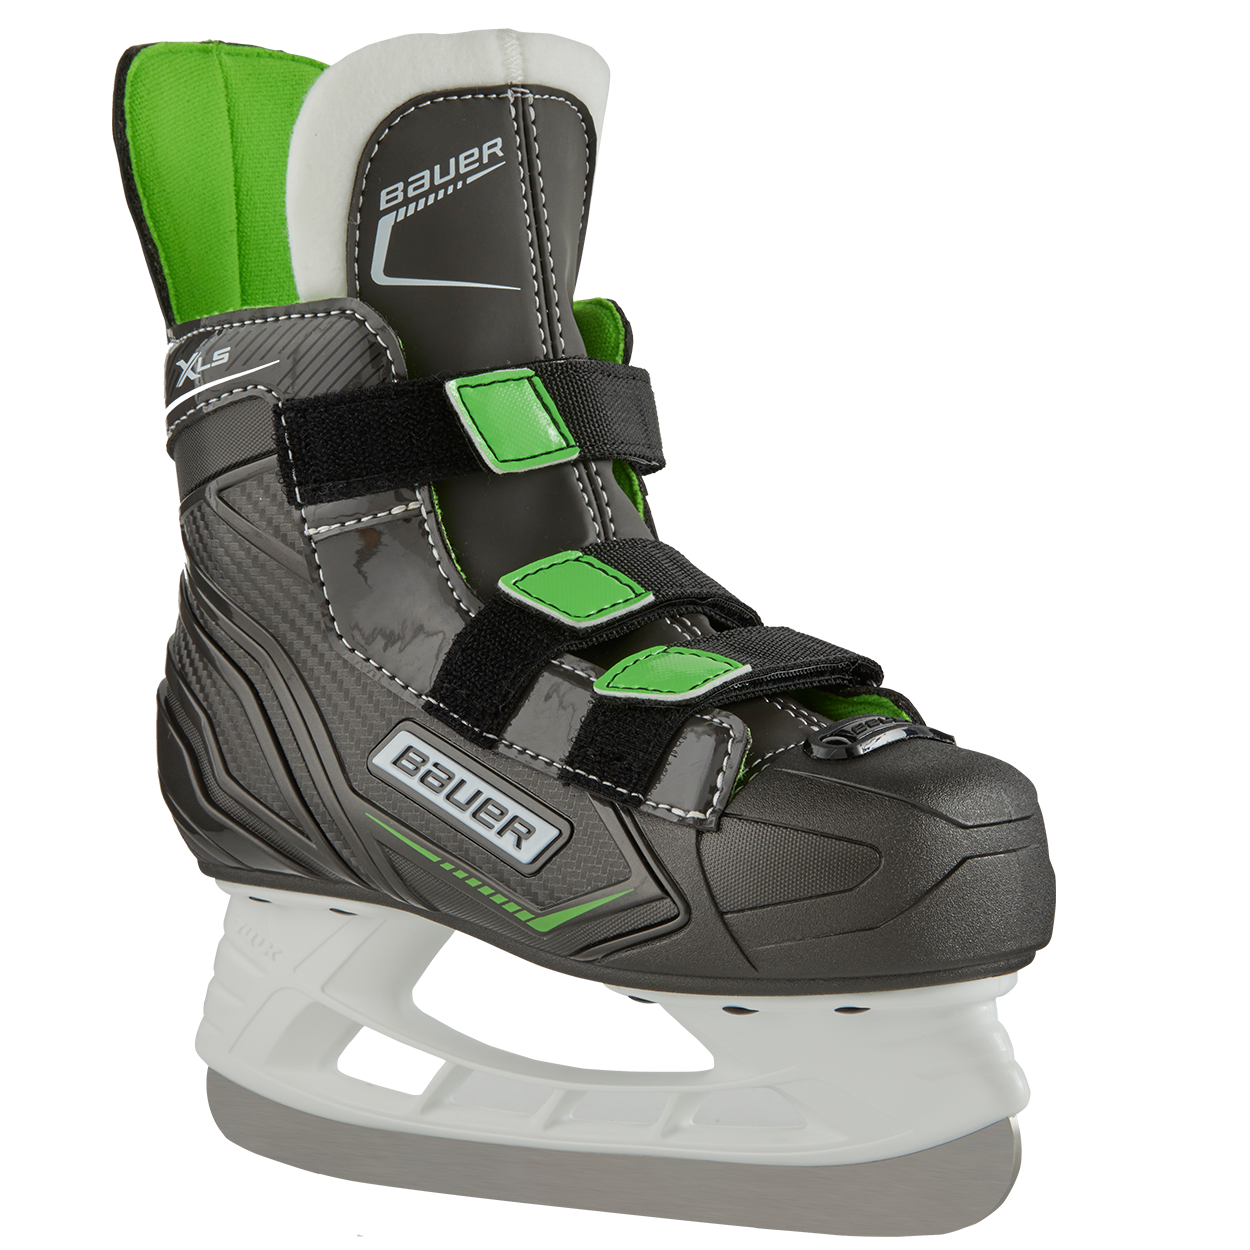 BAUER S21 X-LS YOUTH HOCKEY SKATES-Bauer-Sports Replay - Sports Excellence